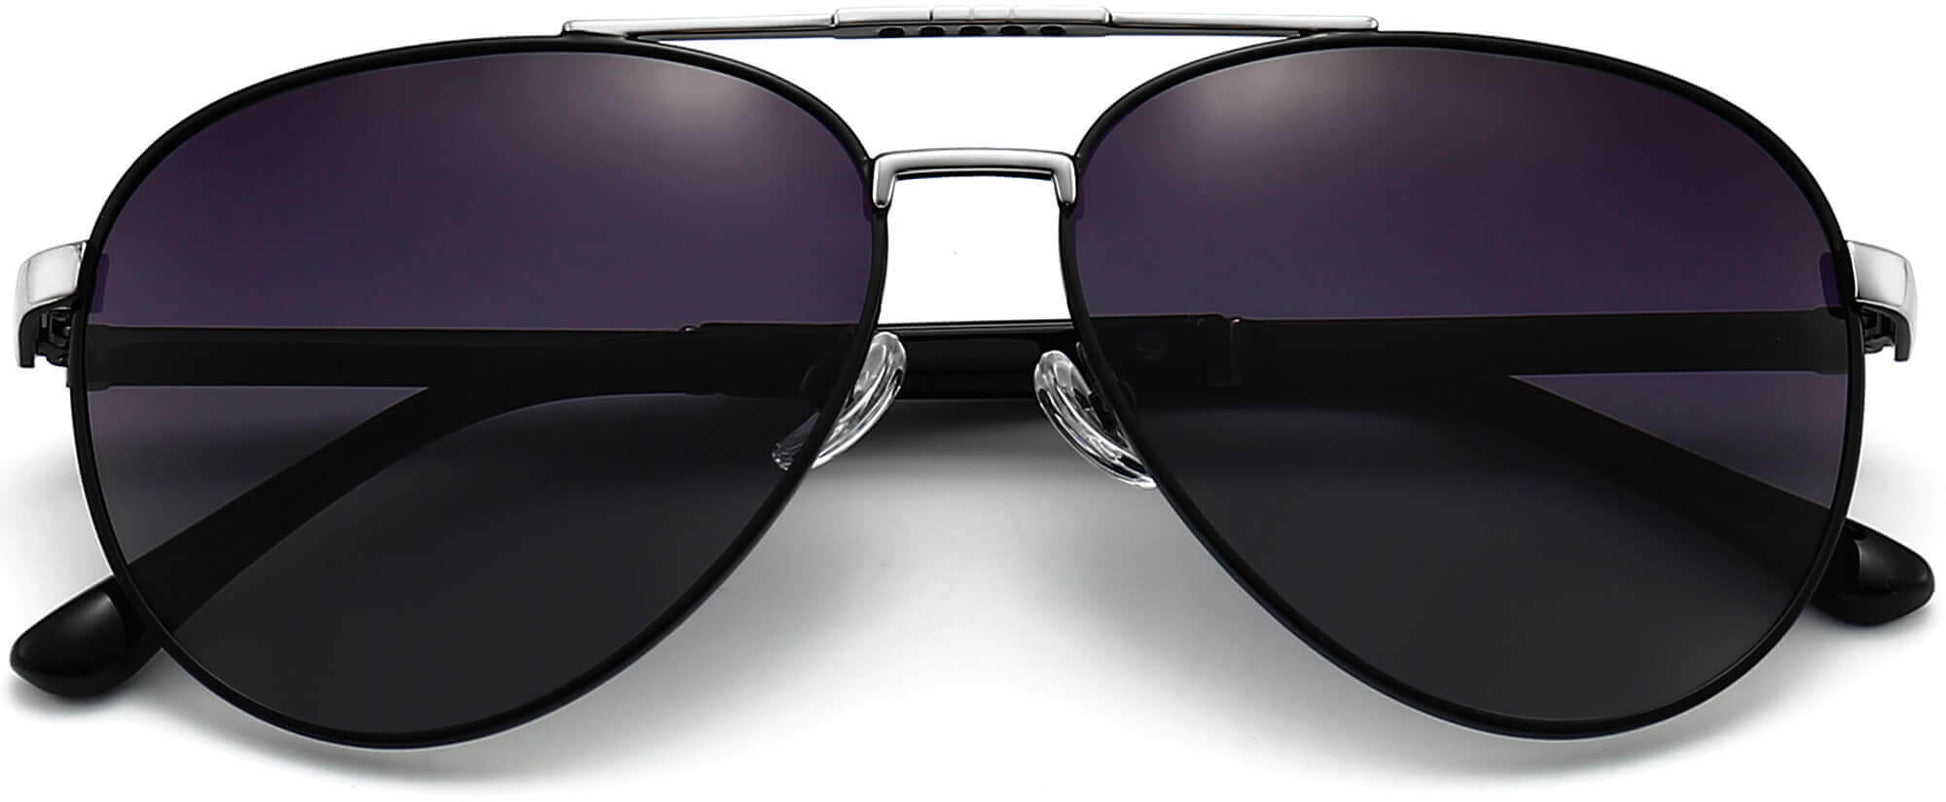 Richard Black Stainless steel Sunglasses from ANRRI, closed view